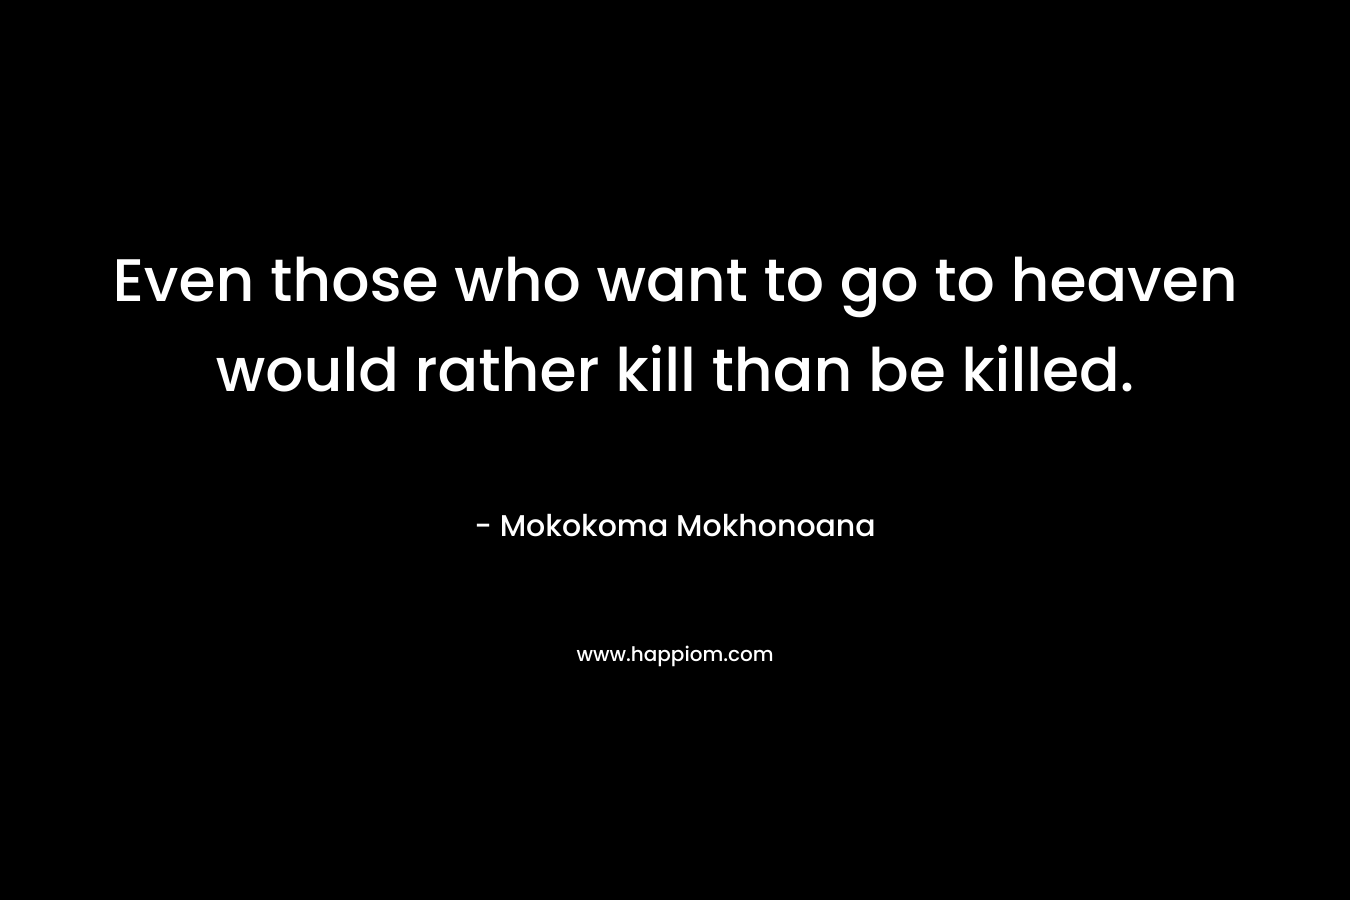 Even those who want to go to heaven would rather kill than be killed.